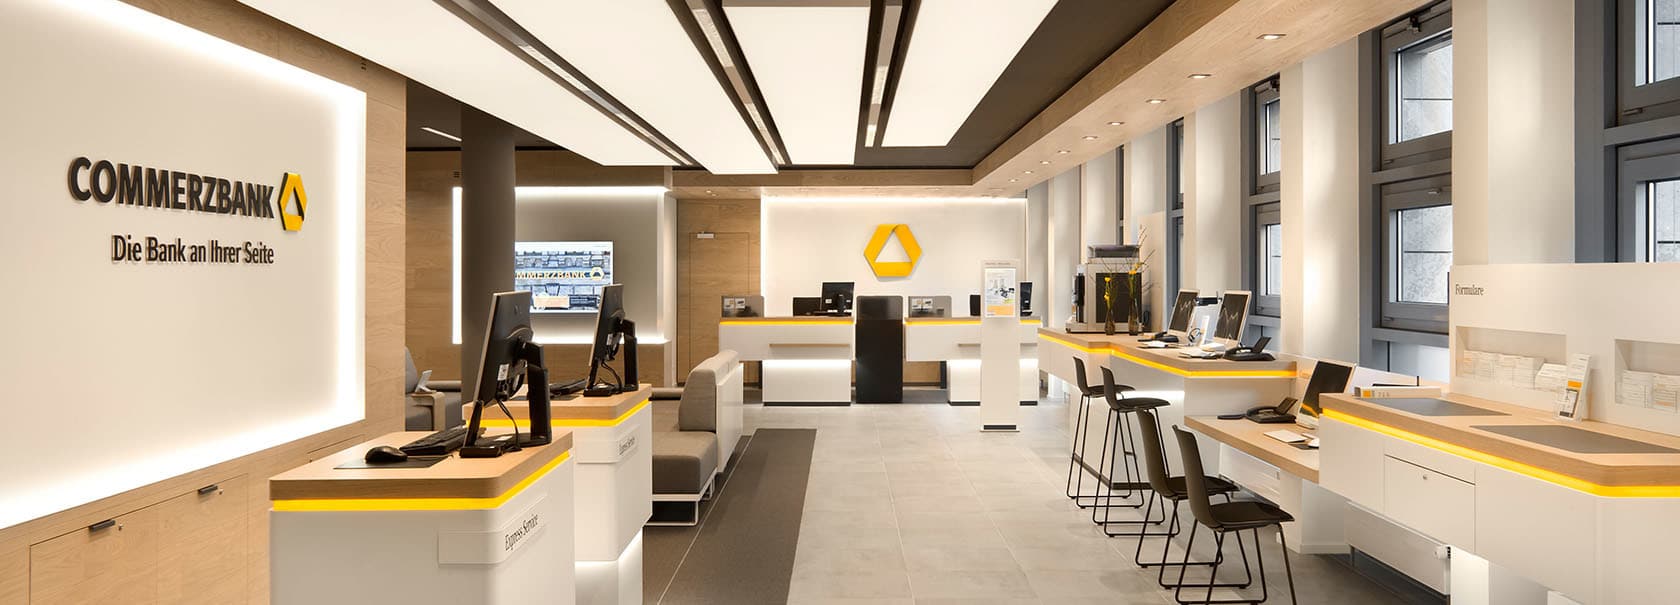 Commerzbank in Berlin celebrates reopening with new branch store concept by dan pearlman